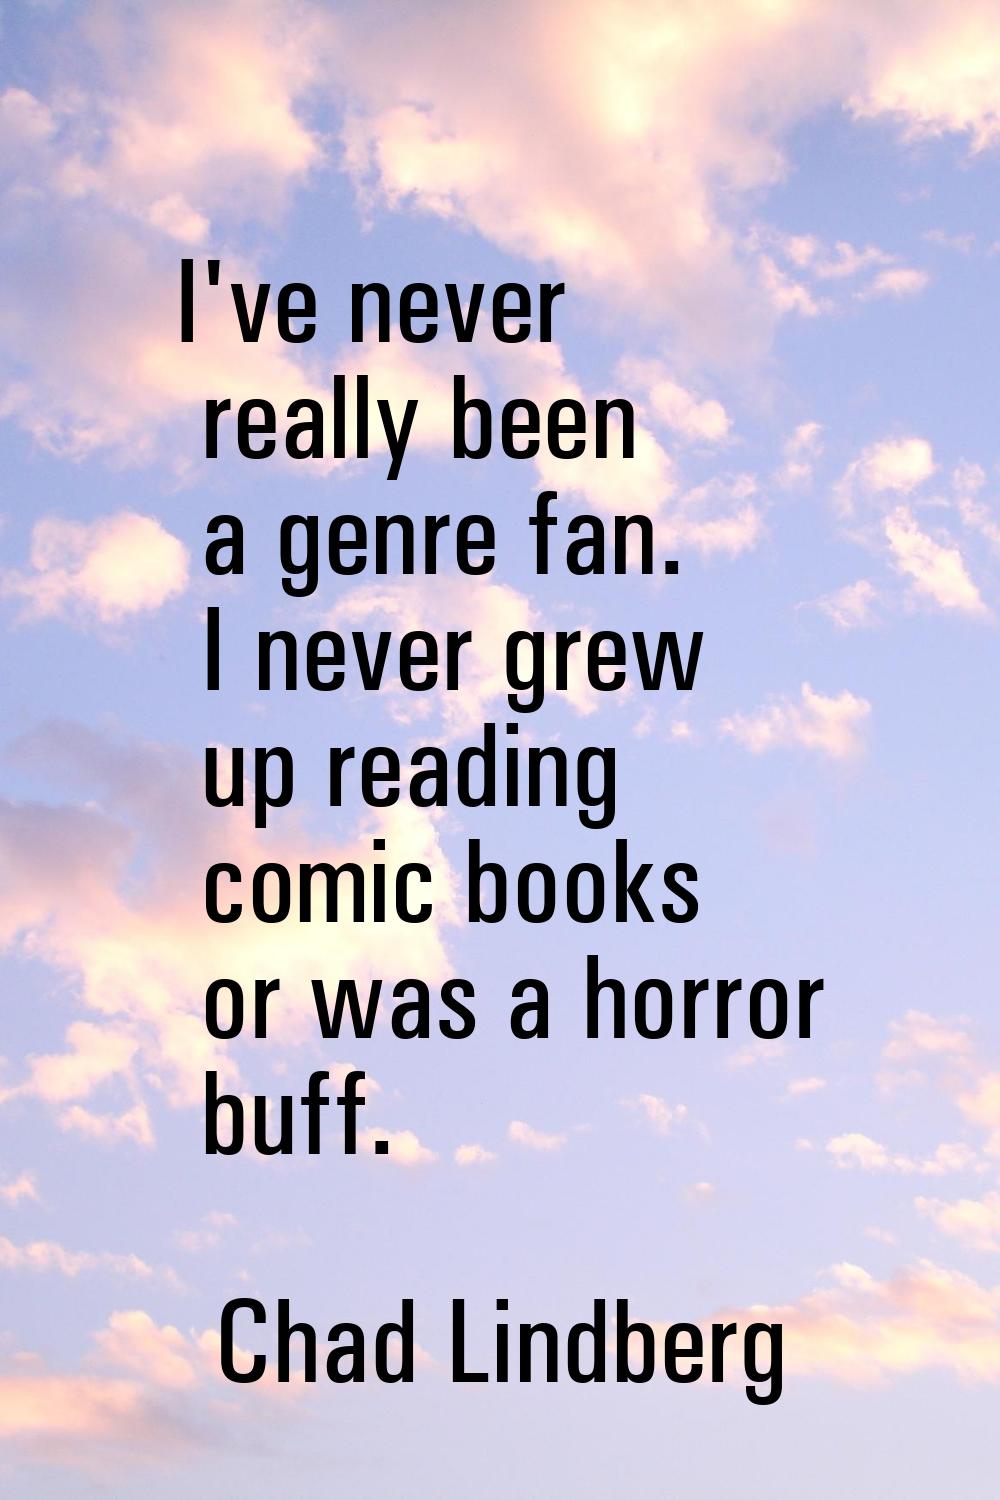 I've never really been a genre fan. I never grew up reading comic books or was a horror buff.